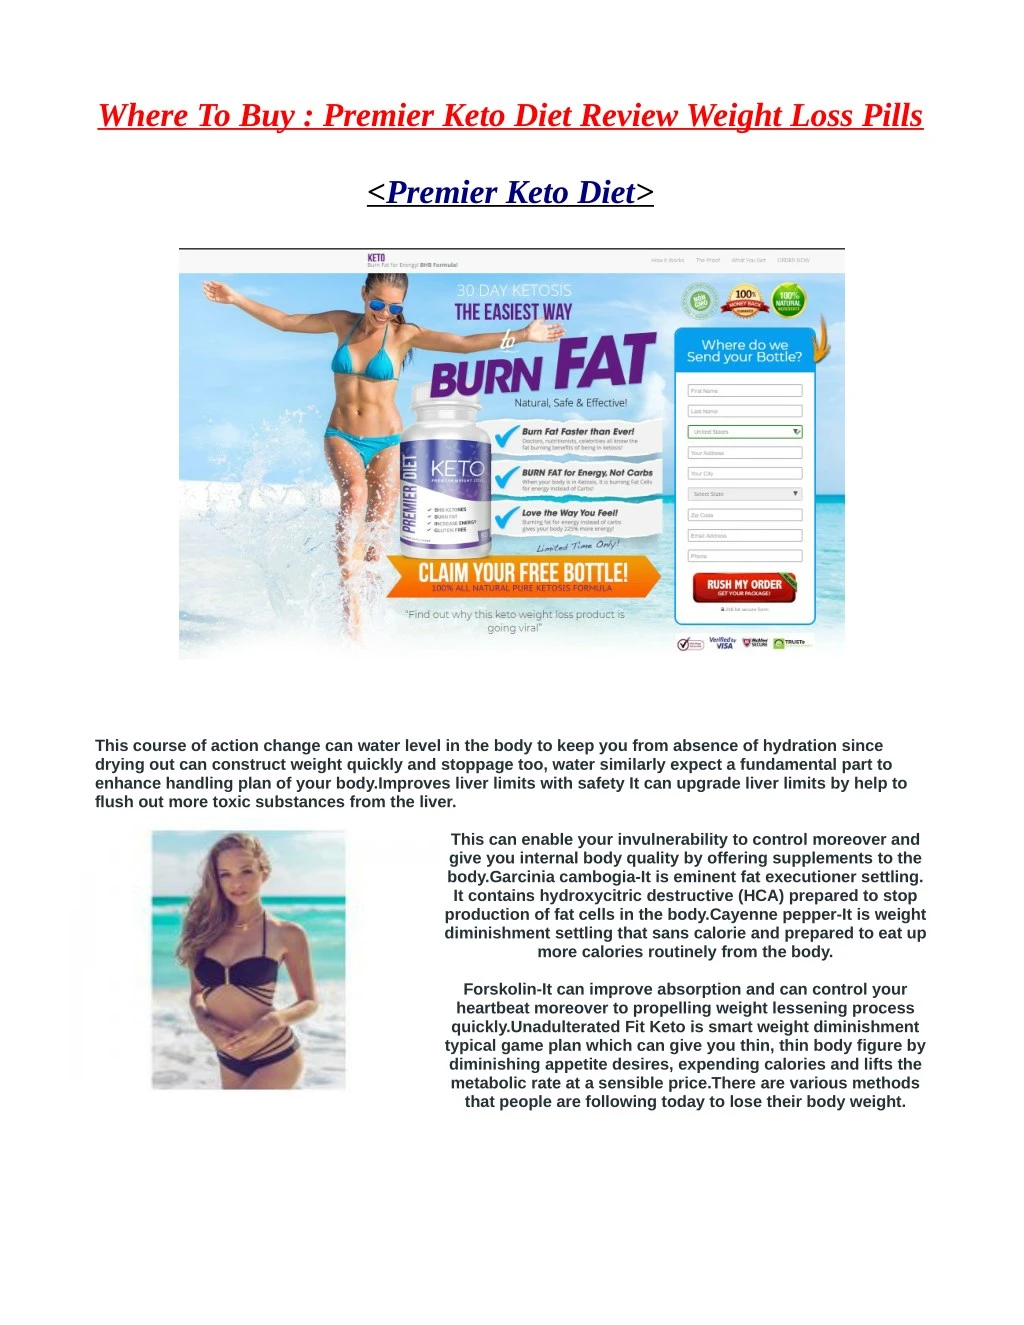 where to buy premier keto diet review weight loss n.